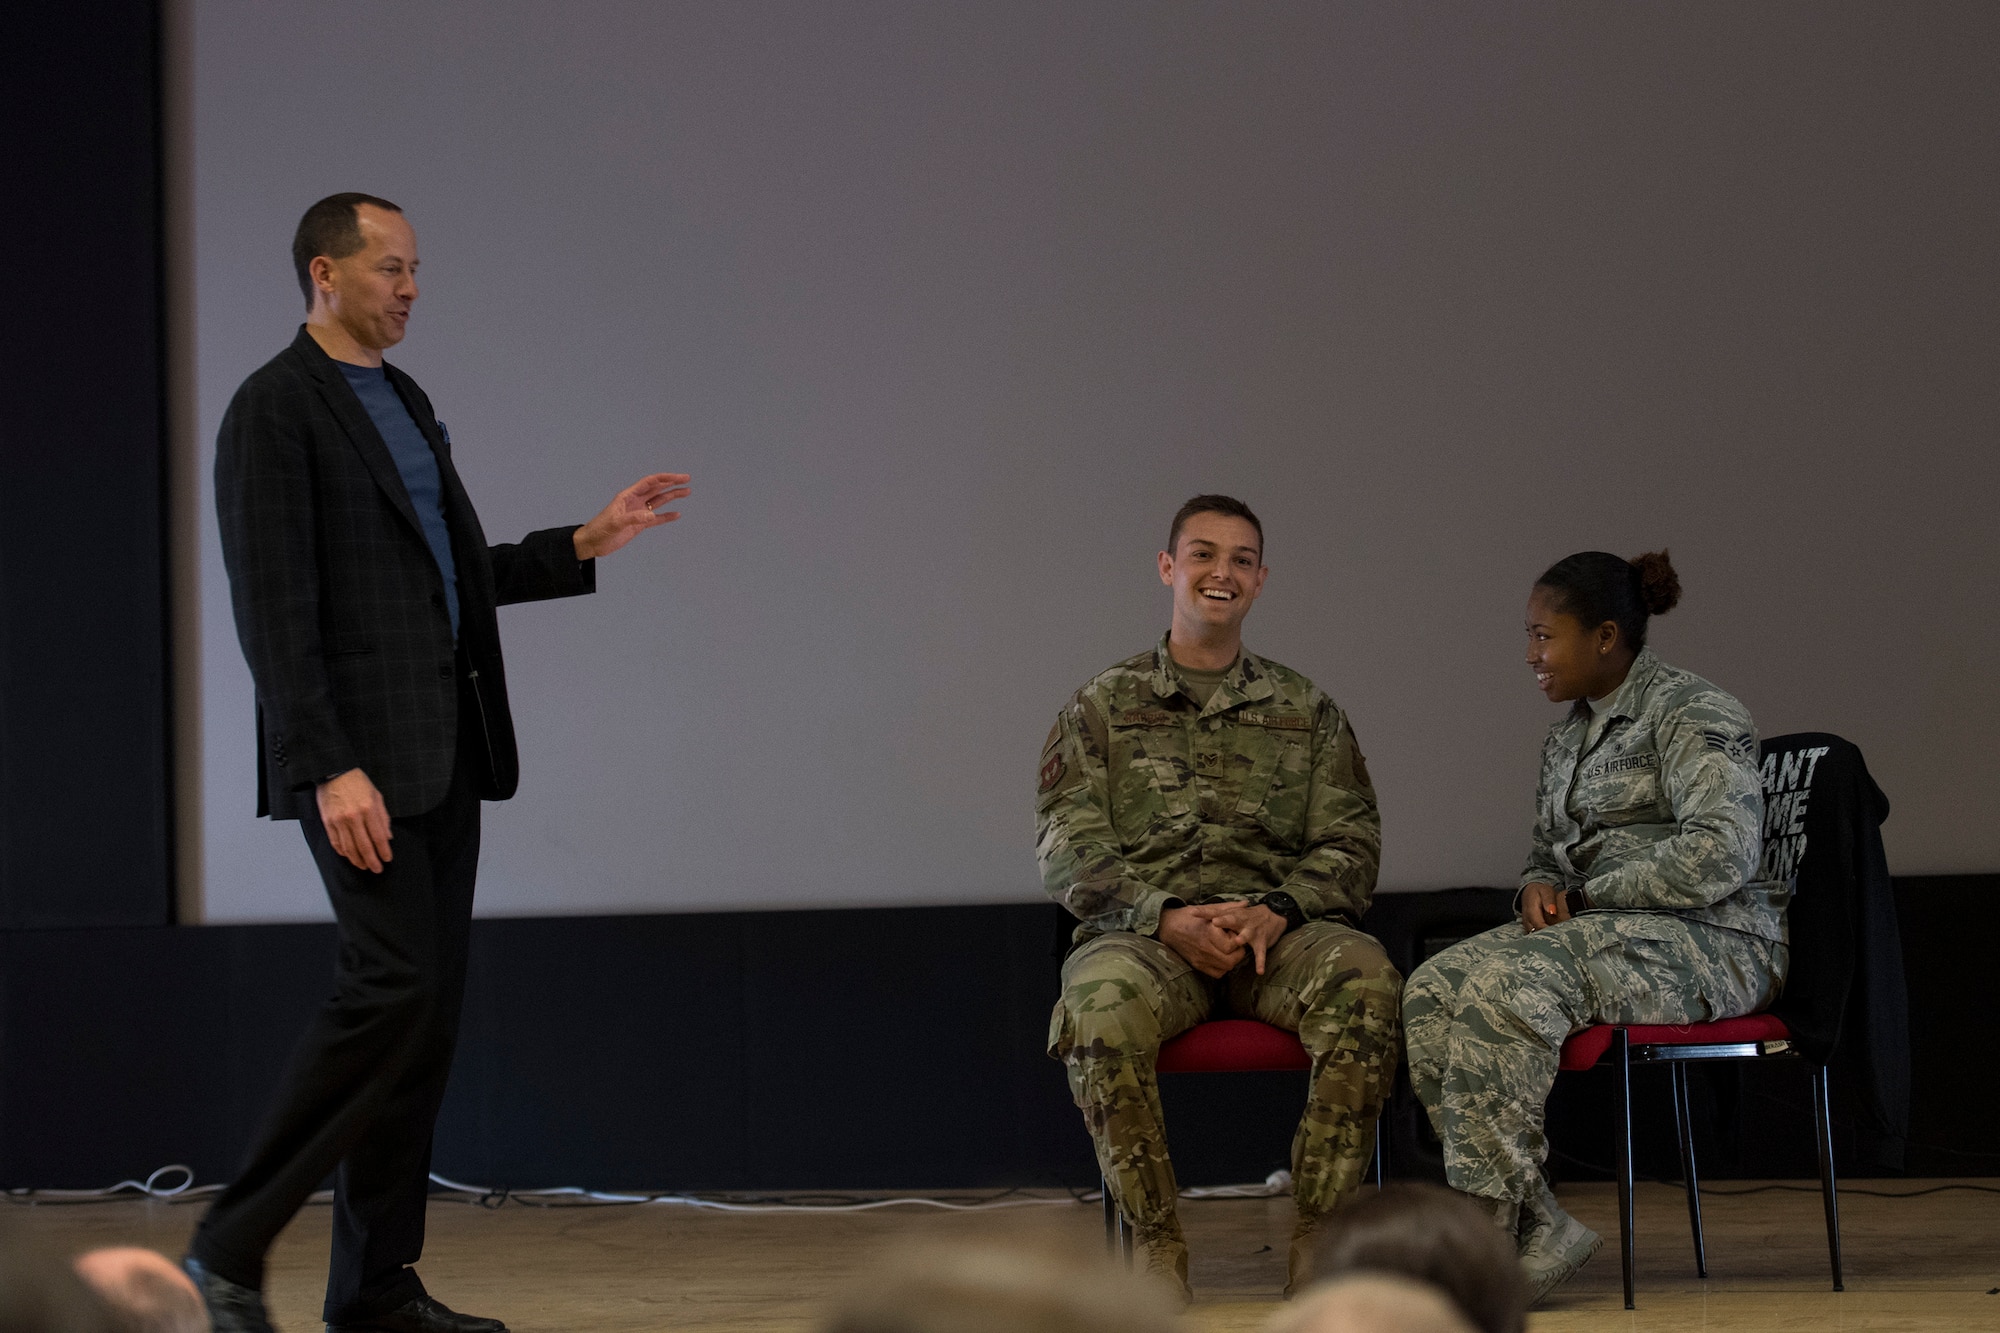 Mike Domitrz, Date Safe Project president, and two Airmen role play during a Sexual Assault Awareness and Prevention Month event April 15, 2019, at Incirlik Air Base, Turkey. The base held multiple awareness events throughout the month of April targeted educating Airmen on what to do instead of what not to do. (U.S. Air Force photo by Staff Sgt. Ceaira Tinsley)